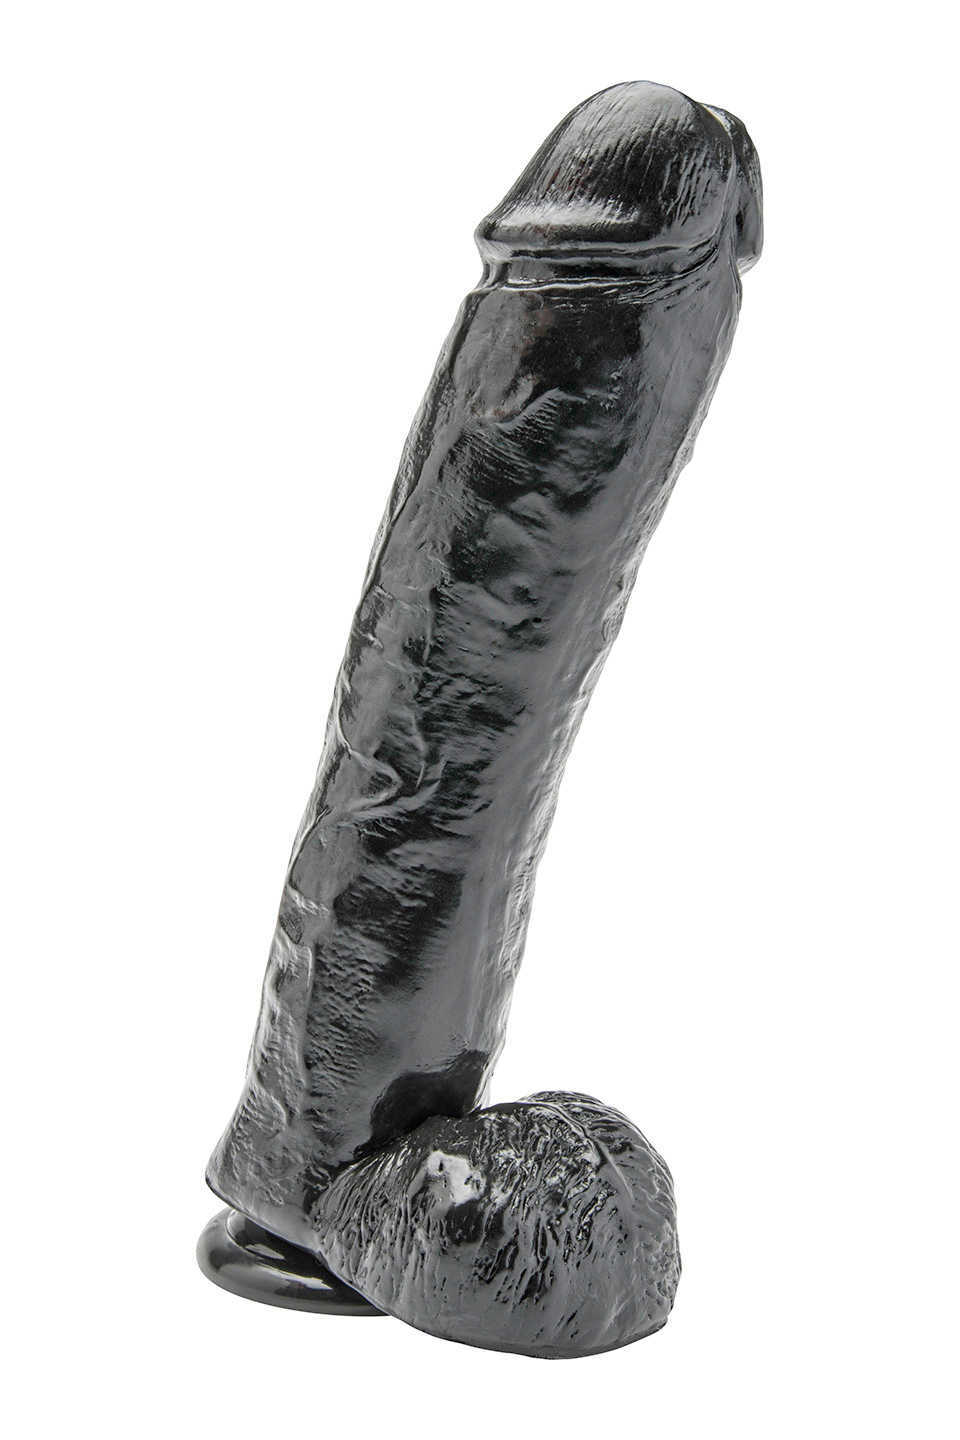 Get Real by TOYJOY Dildo 11 Inch